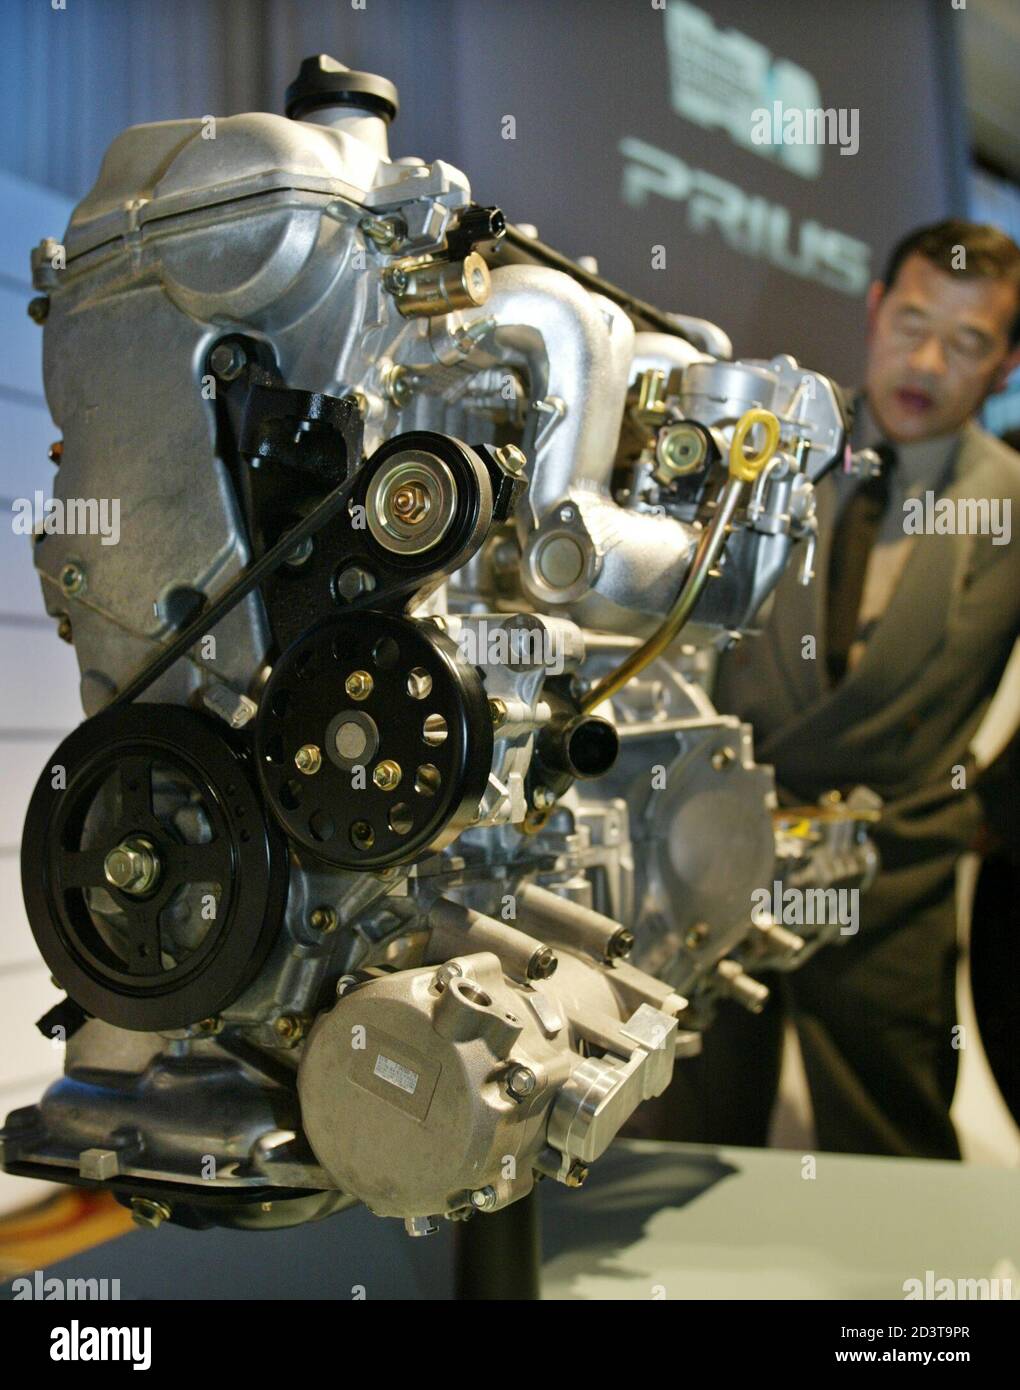 2 PIC:TOK61D  Toyota Motor Corp. displays hybrid system THS II during an unveiling of the all-new 'Prius' in Tokyo April 17, 2003. The new Prius is equipped with Toyota's new hybrid system THS II that allows either gas or electric modes as well as a mode in which both the gas engine and the electric motor are in operation. REUTERS/Issei Kato Stock Photo